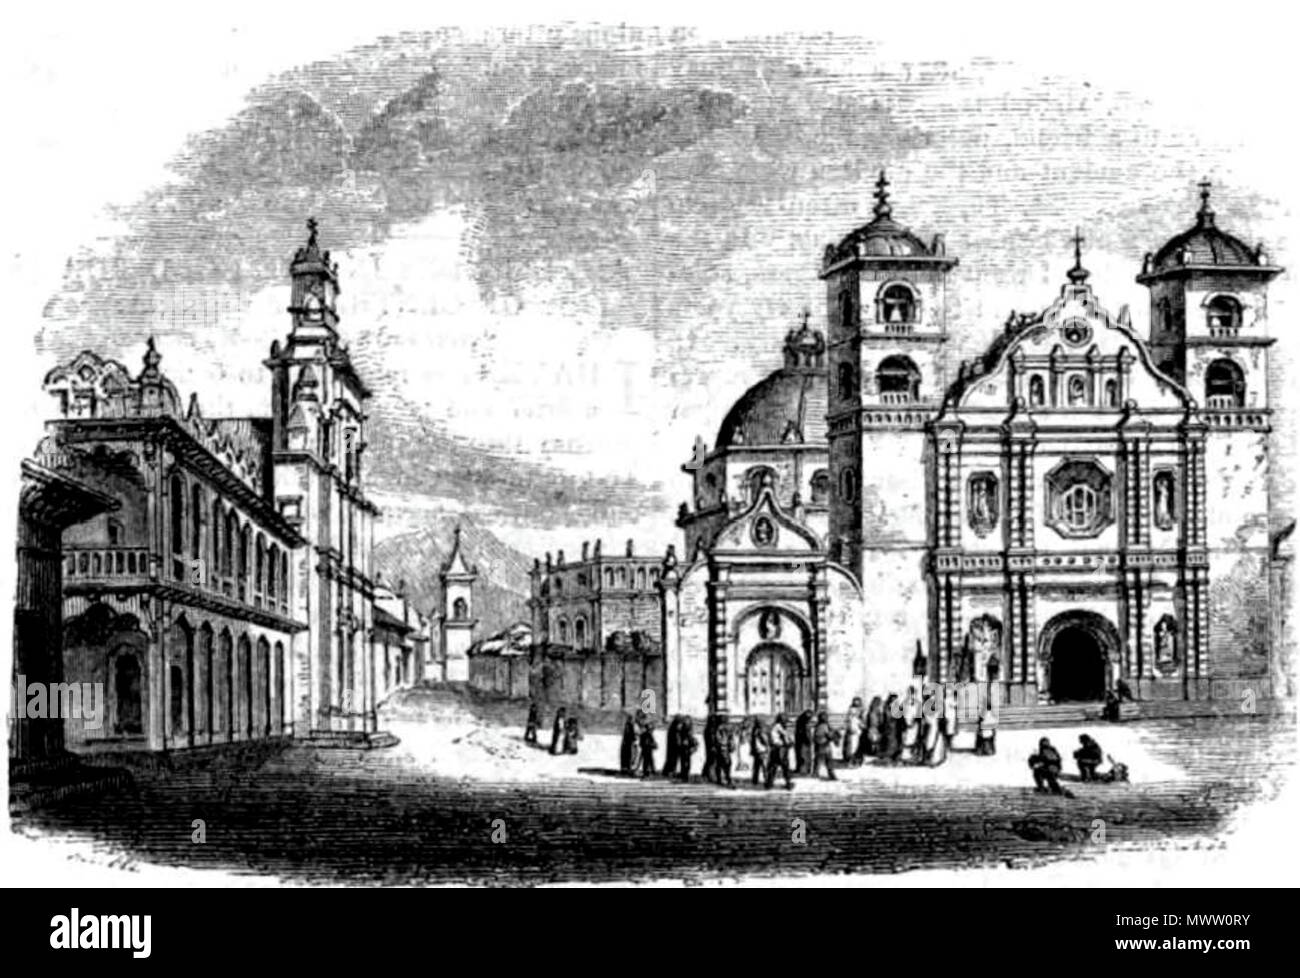 . English: Historic Drawing of Tegucigalpa back in the 1800's . 5 November 2011. Harper's new Monthly magazine 589 Tegus Imagen Historica Stock Photo